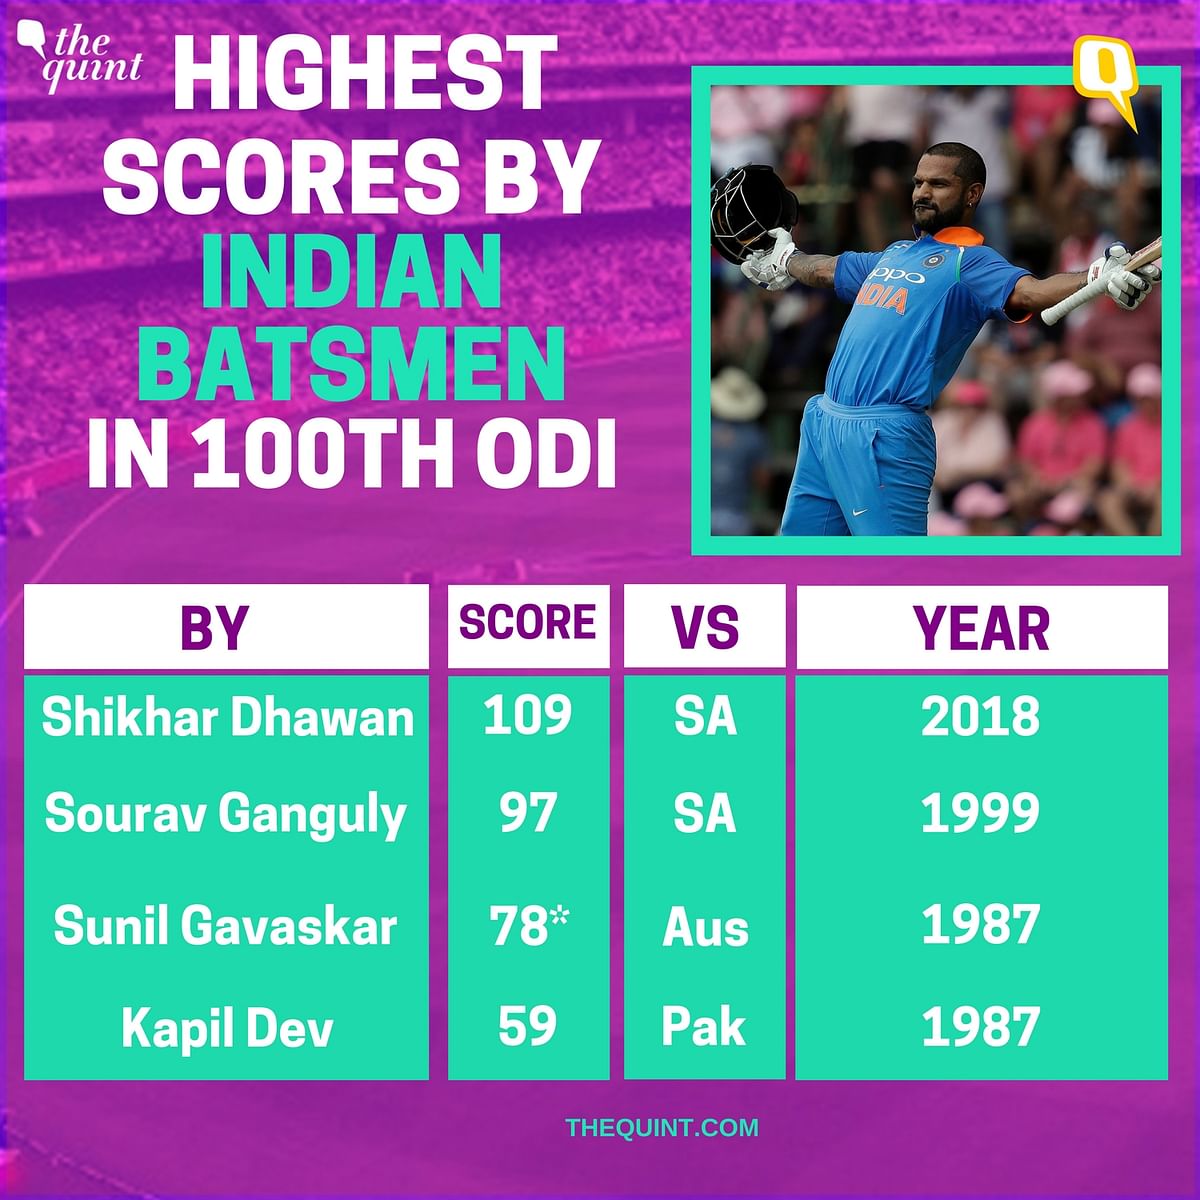 Shikhar Dhawan celebrated the occasion of his 100th ODI by scoring a century against South Africa.